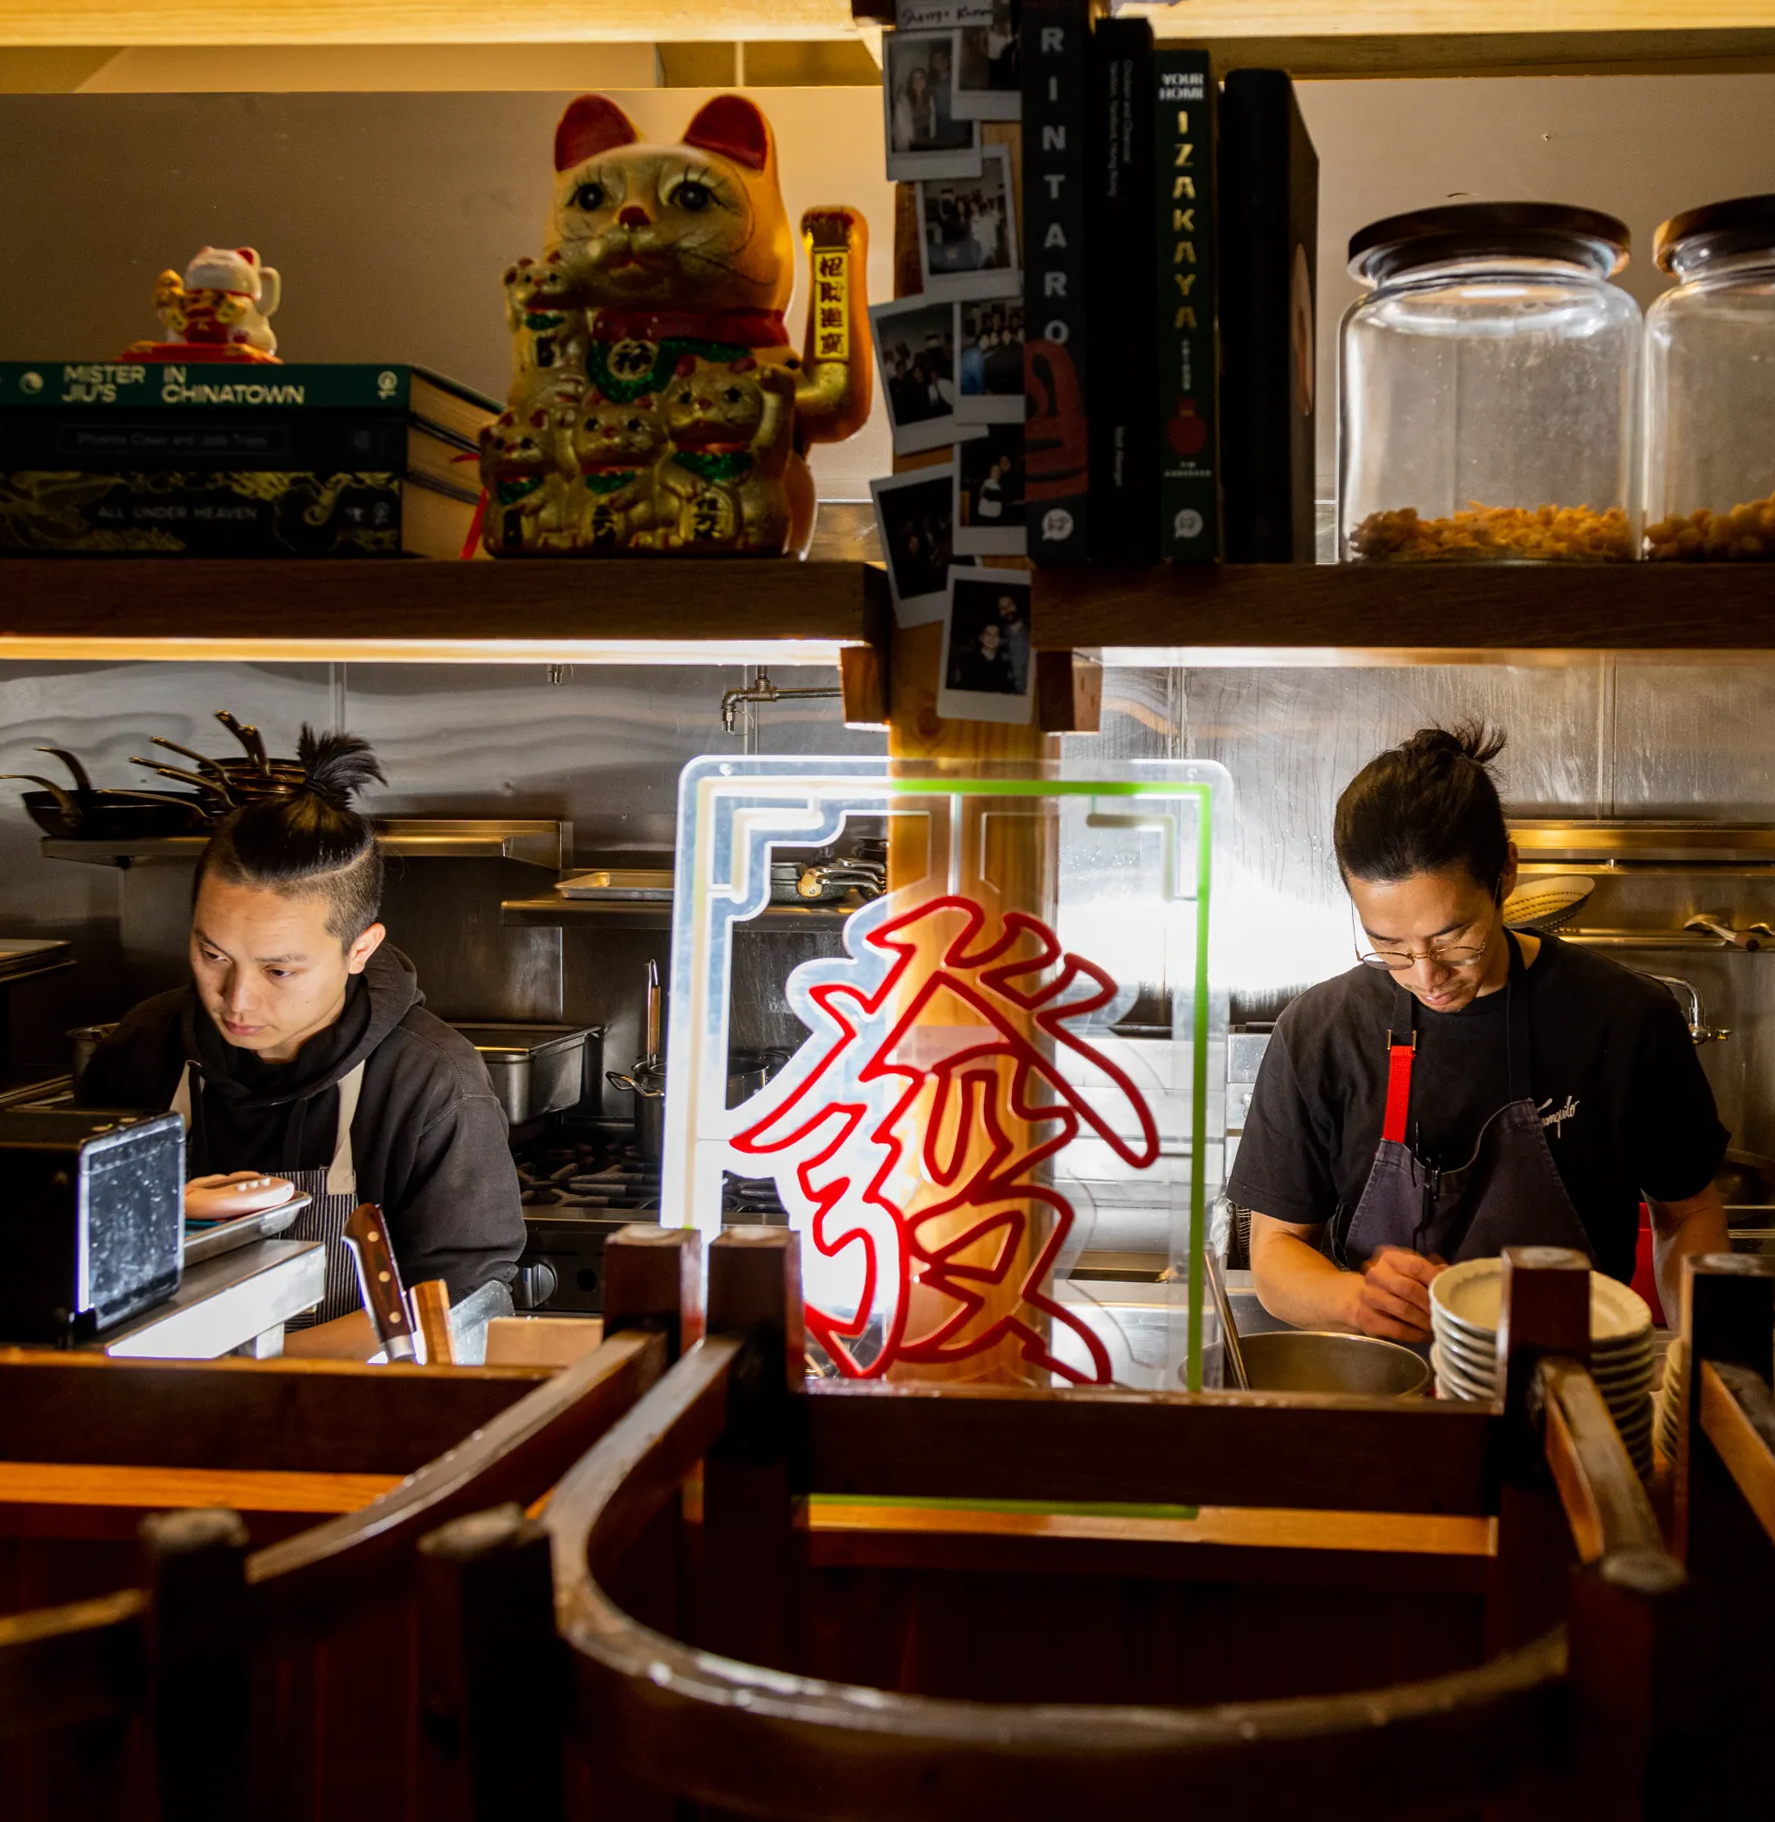 Two chefs work in a kitchen with Asian decor, including a maneki-neko (lucky cat) and a neon sign.